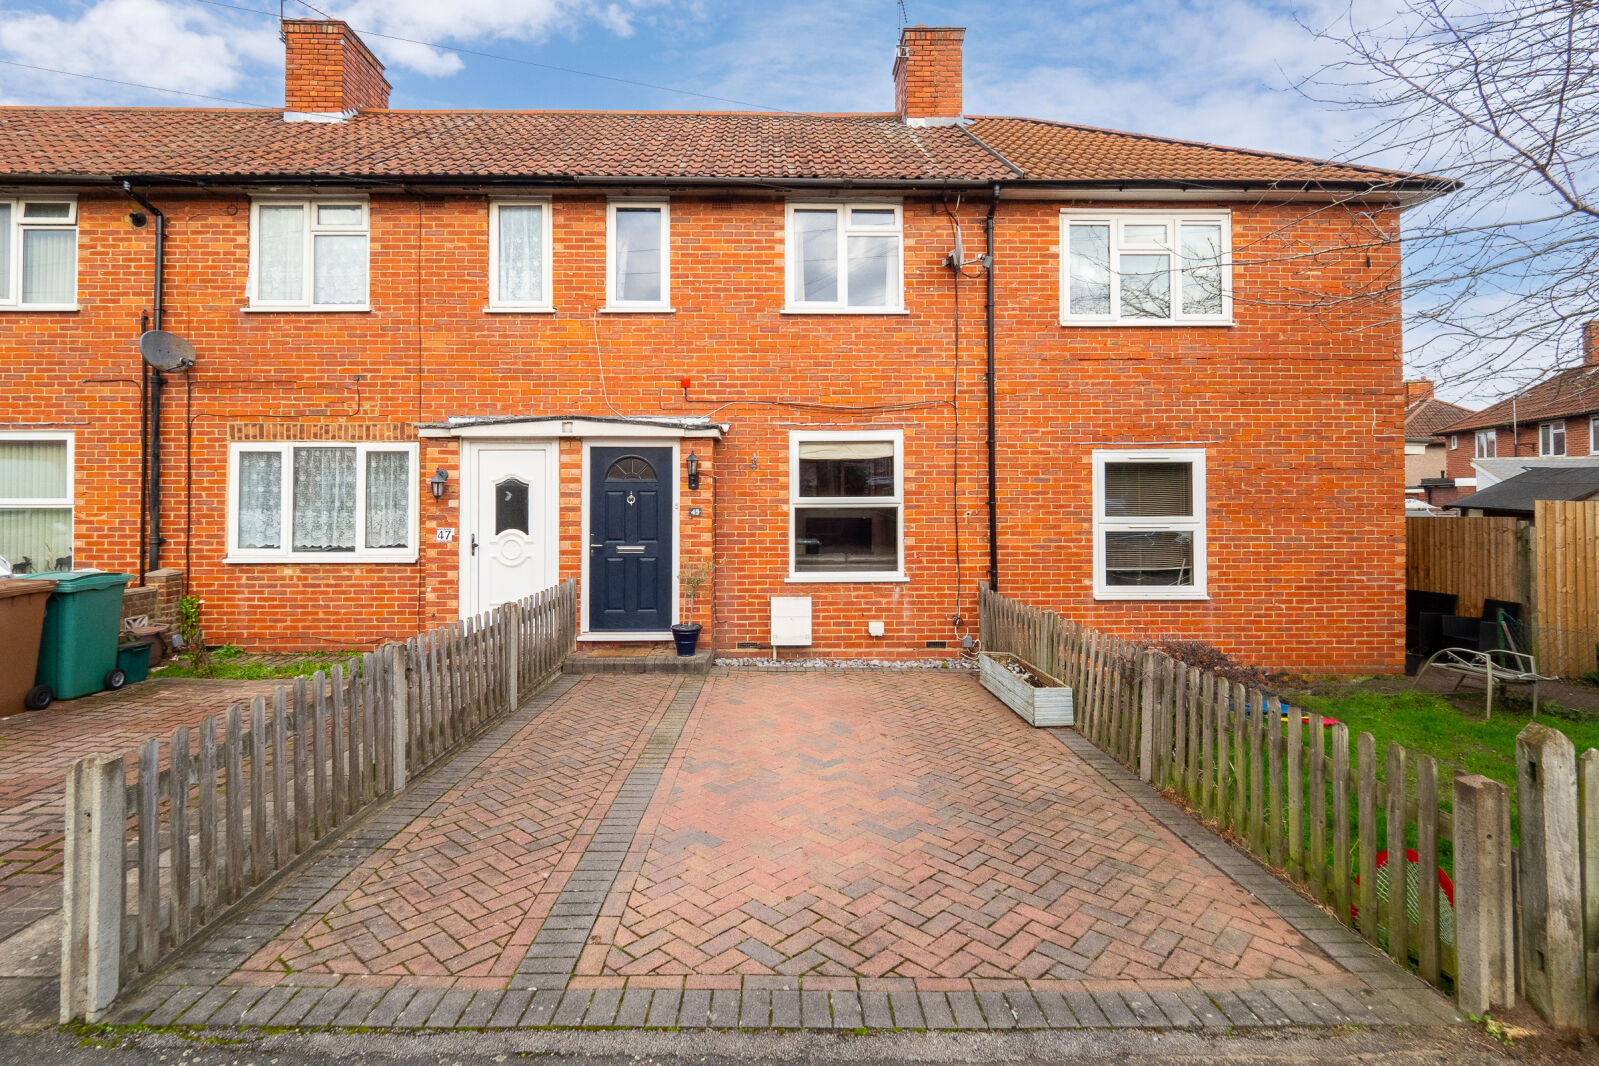 3 bedroom mid terraced house for sale Quarr Road, Carshalton, SM5, main image